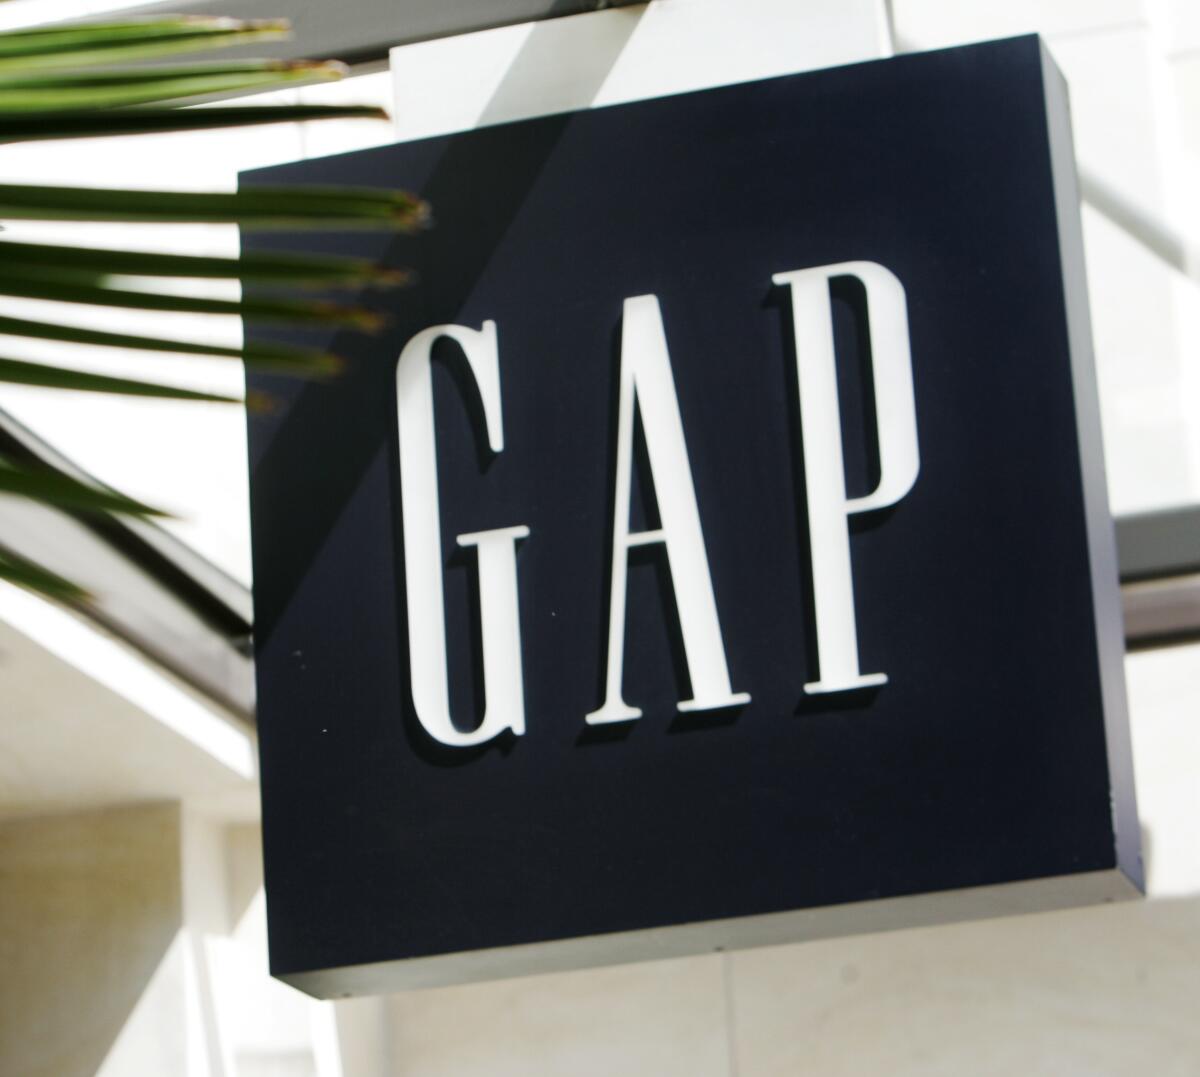 FILE - In this Thursday, April 12, 2007 file photo, A sign at a Gap store is seen in The Grove shopping area in Los Angeles. A dozen retailers including Gap and H&M are collaborating on a campaign this fall to enlist customers to combat bad behavior against retail workers. The campaign is being spearheaded by Open to All and two other groups, and comes as workers face increased harassment as they try to enforce social distancing and mask protocols during the pandemic. (AP Photo/Reed Saxon, File)